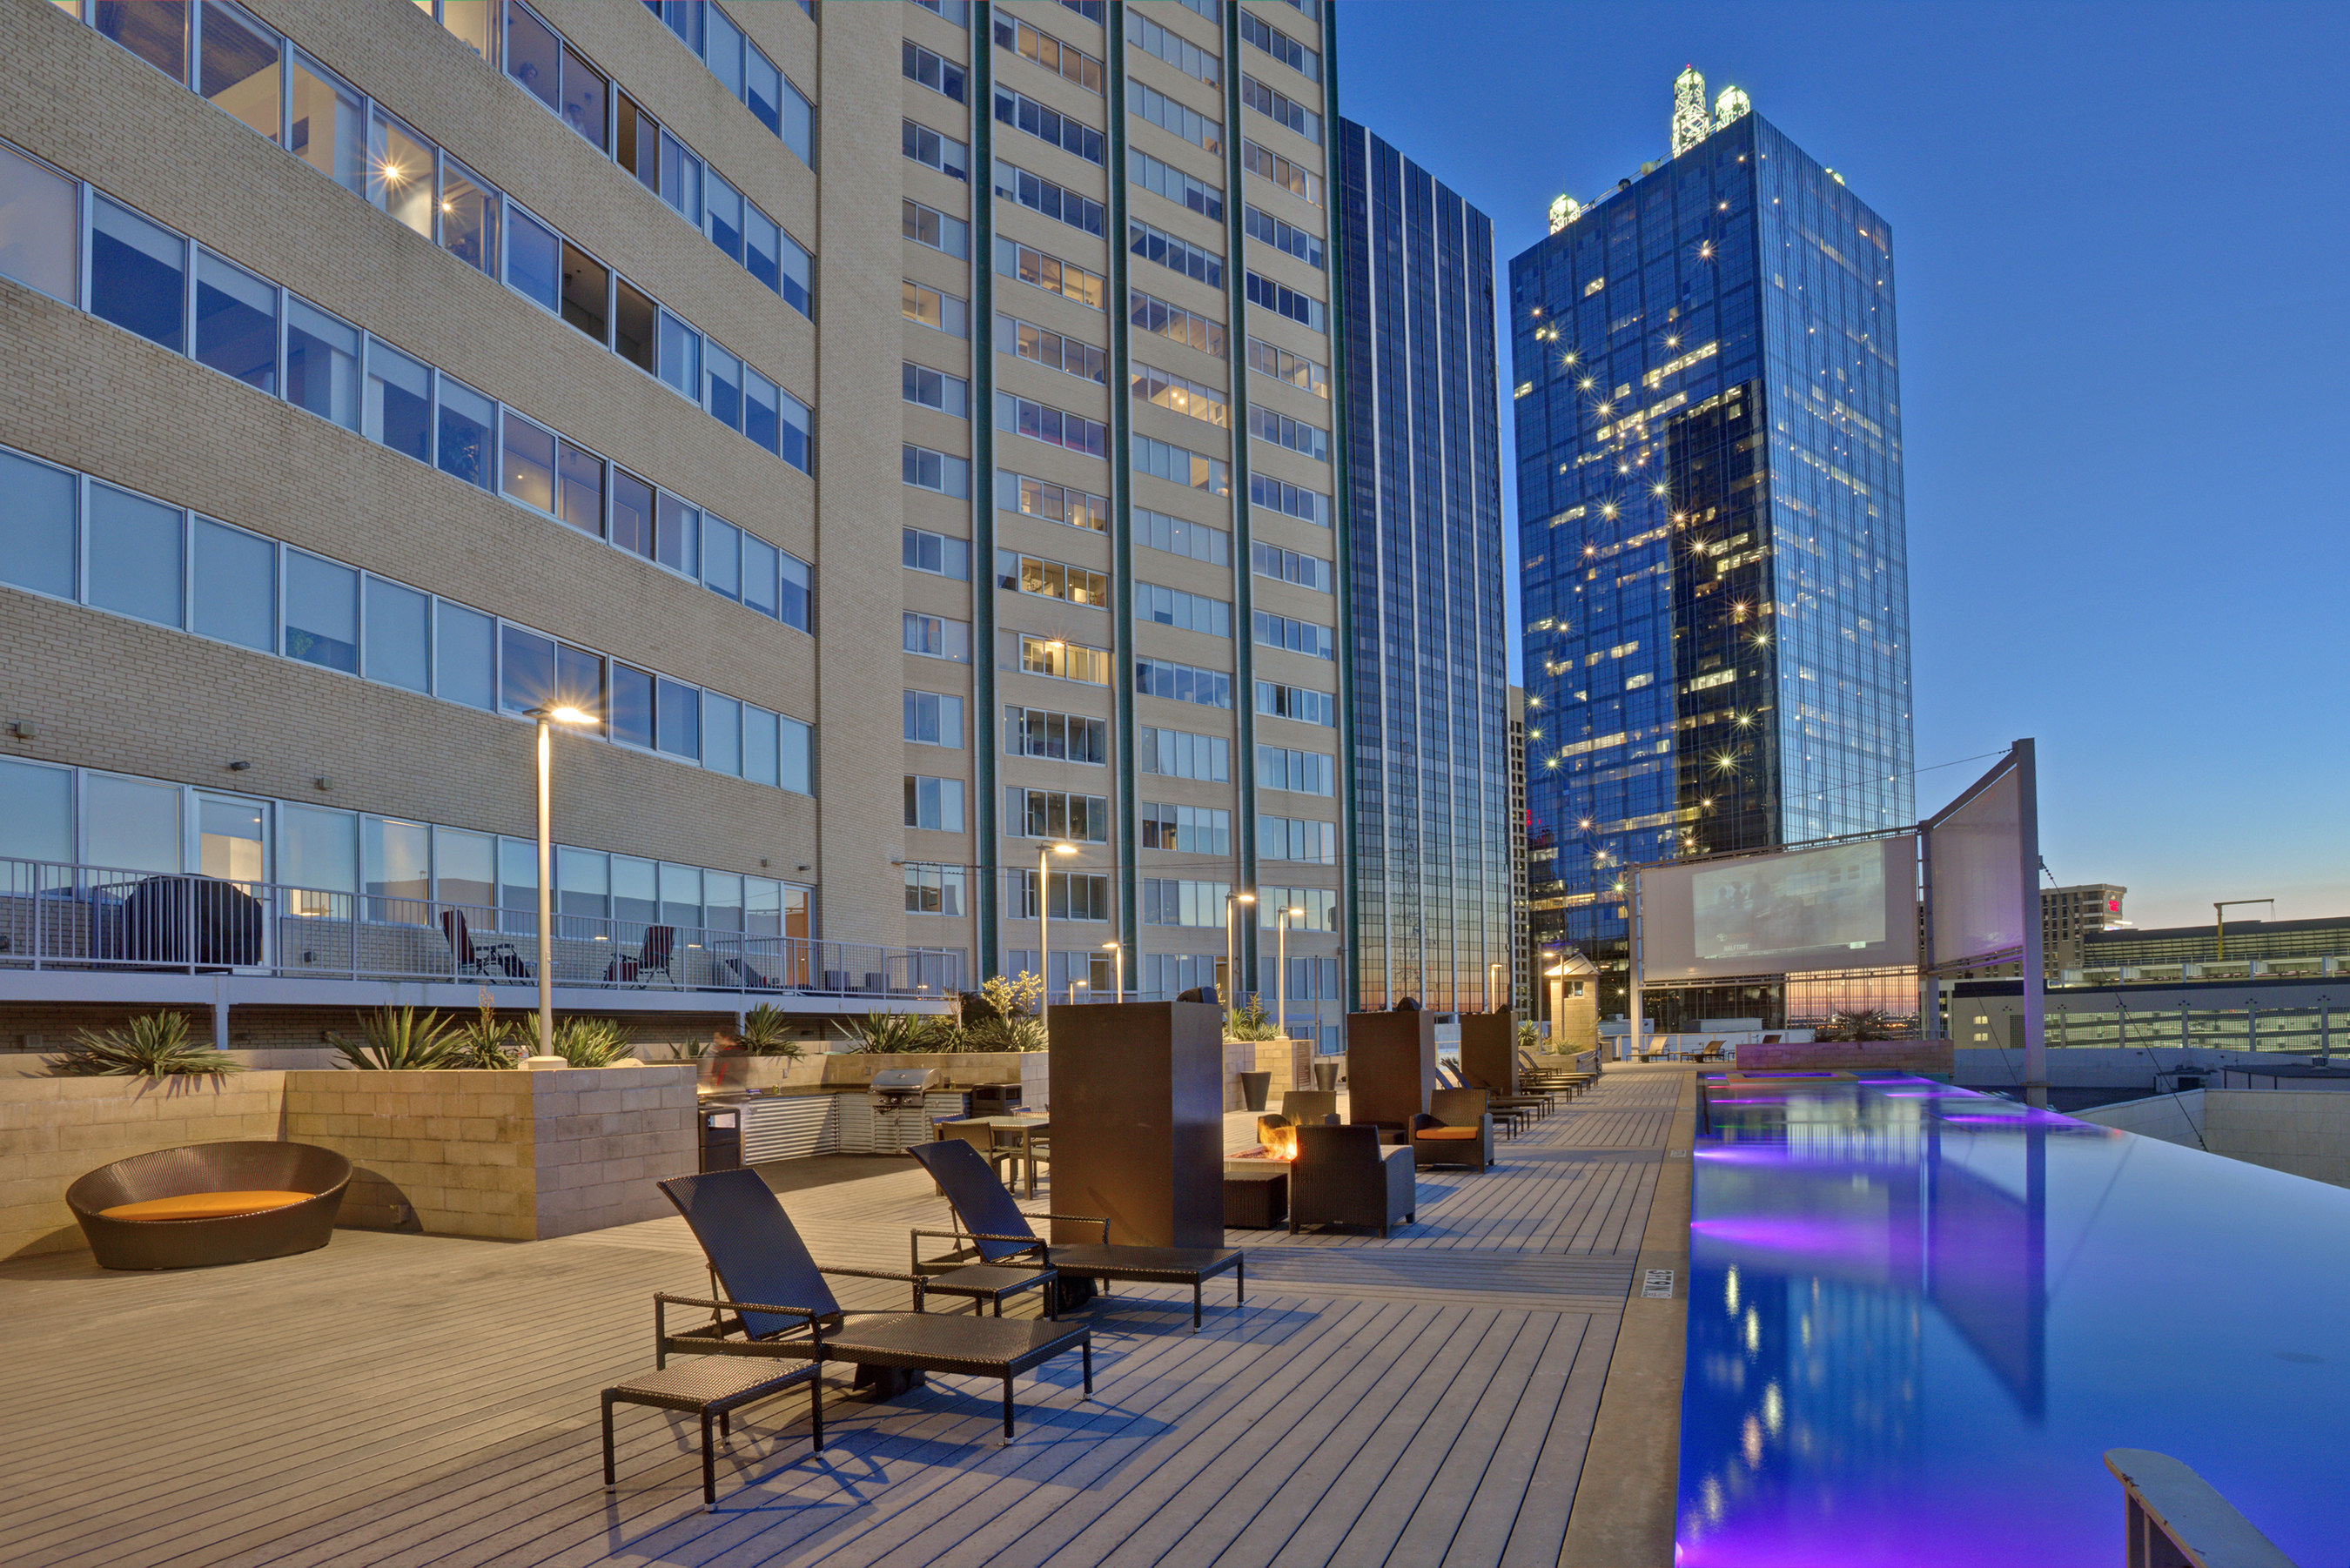 Olympus Property is proud to announce the acquisitions of Mosaic in downtown Dallas. This image displays the pool deck area with stunning views of downtown Dallas.